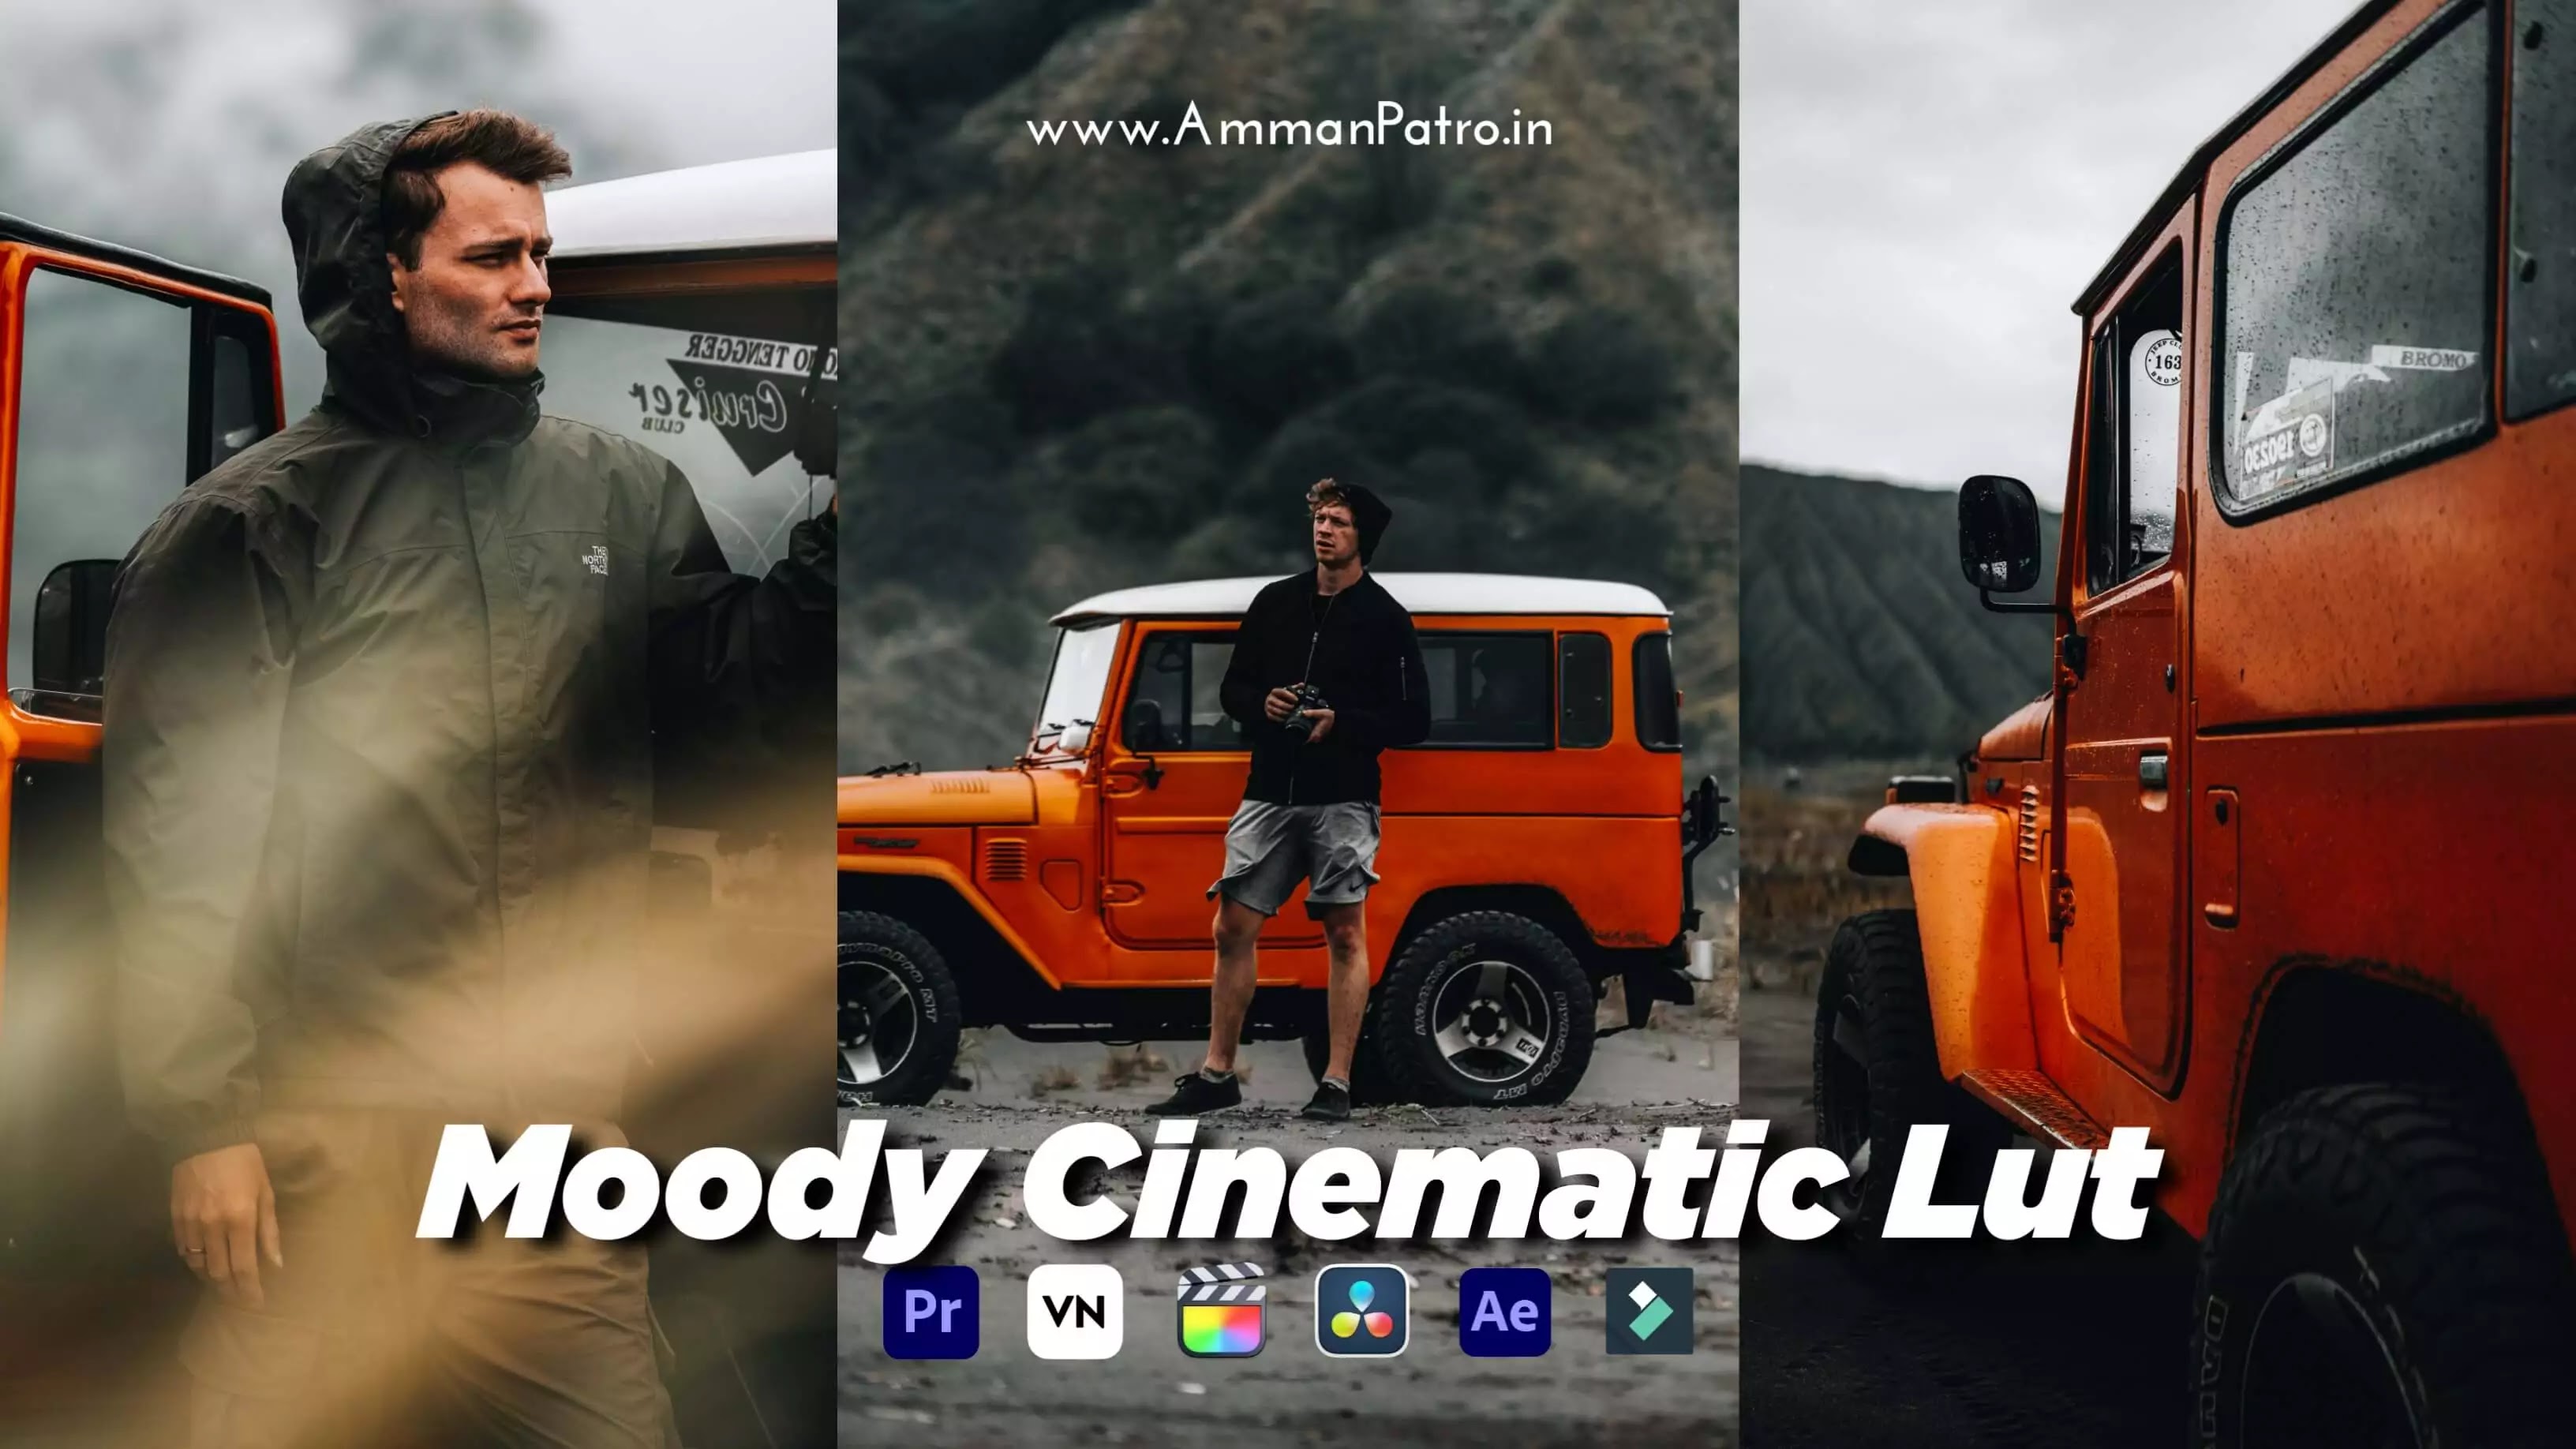 Moody Cinematic Free Video LUTs, Download FREE Moody Cinematic Video Filter, Free Video Luts, Free Video Filters, Amman Video Luts, Amman Presets, Amman Free Video Filters